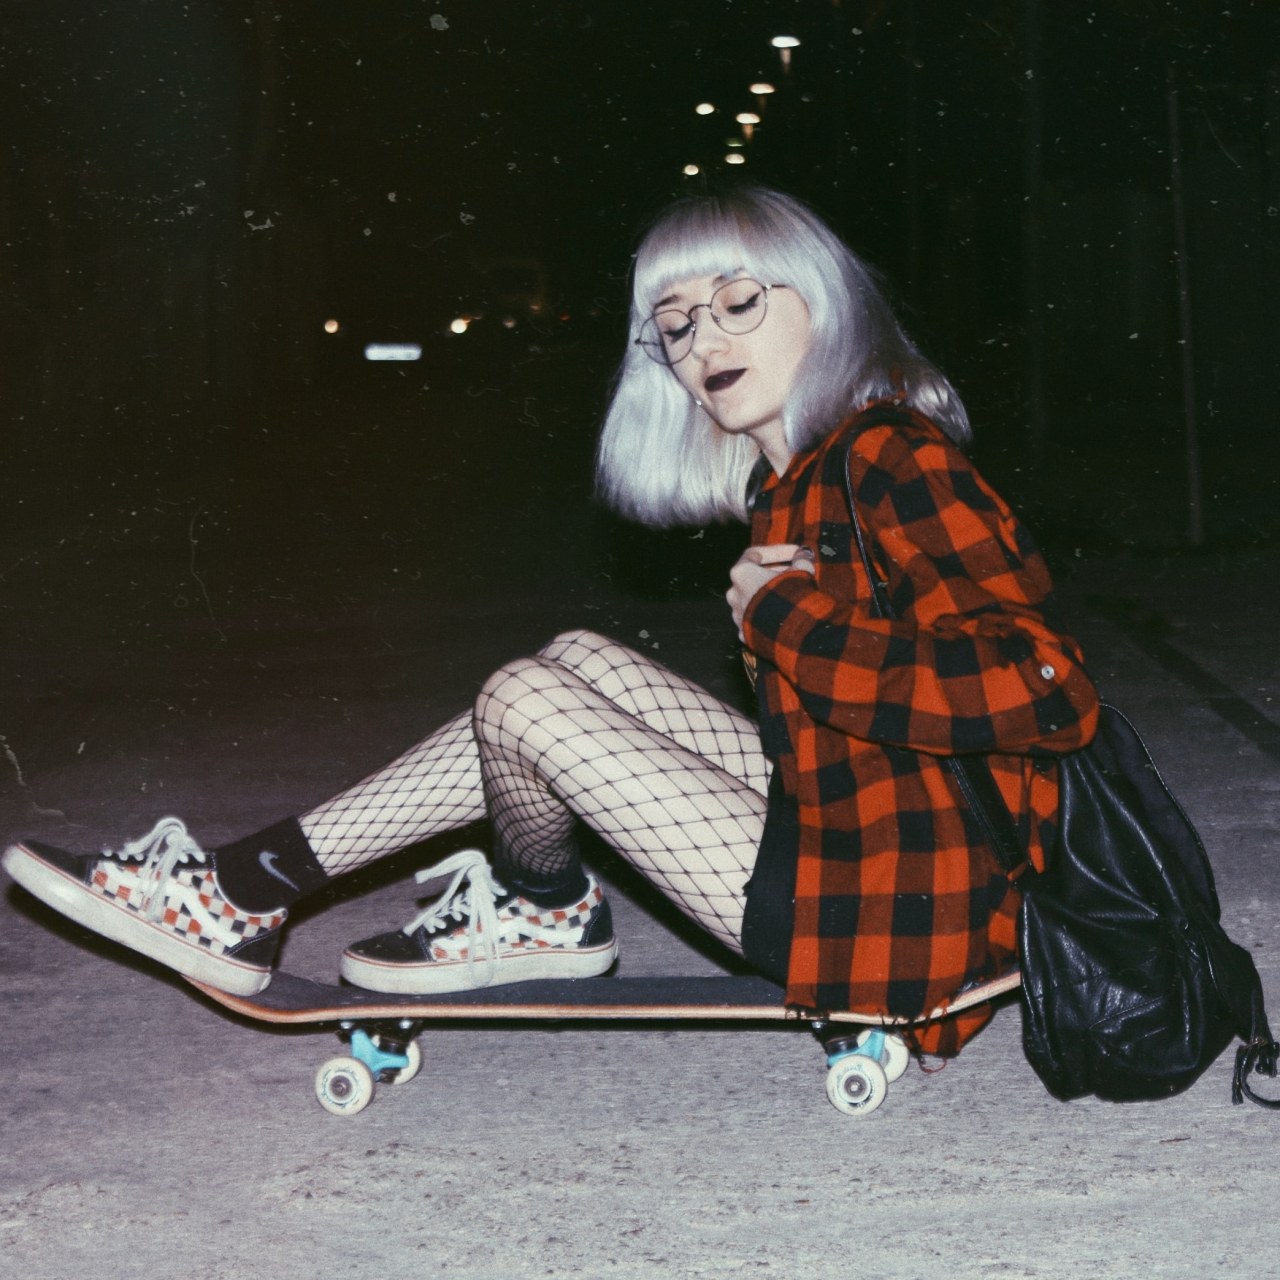 Aesthetic Skater Girl Outfits Largest Wallpaper Portal | Hot Sex Picture